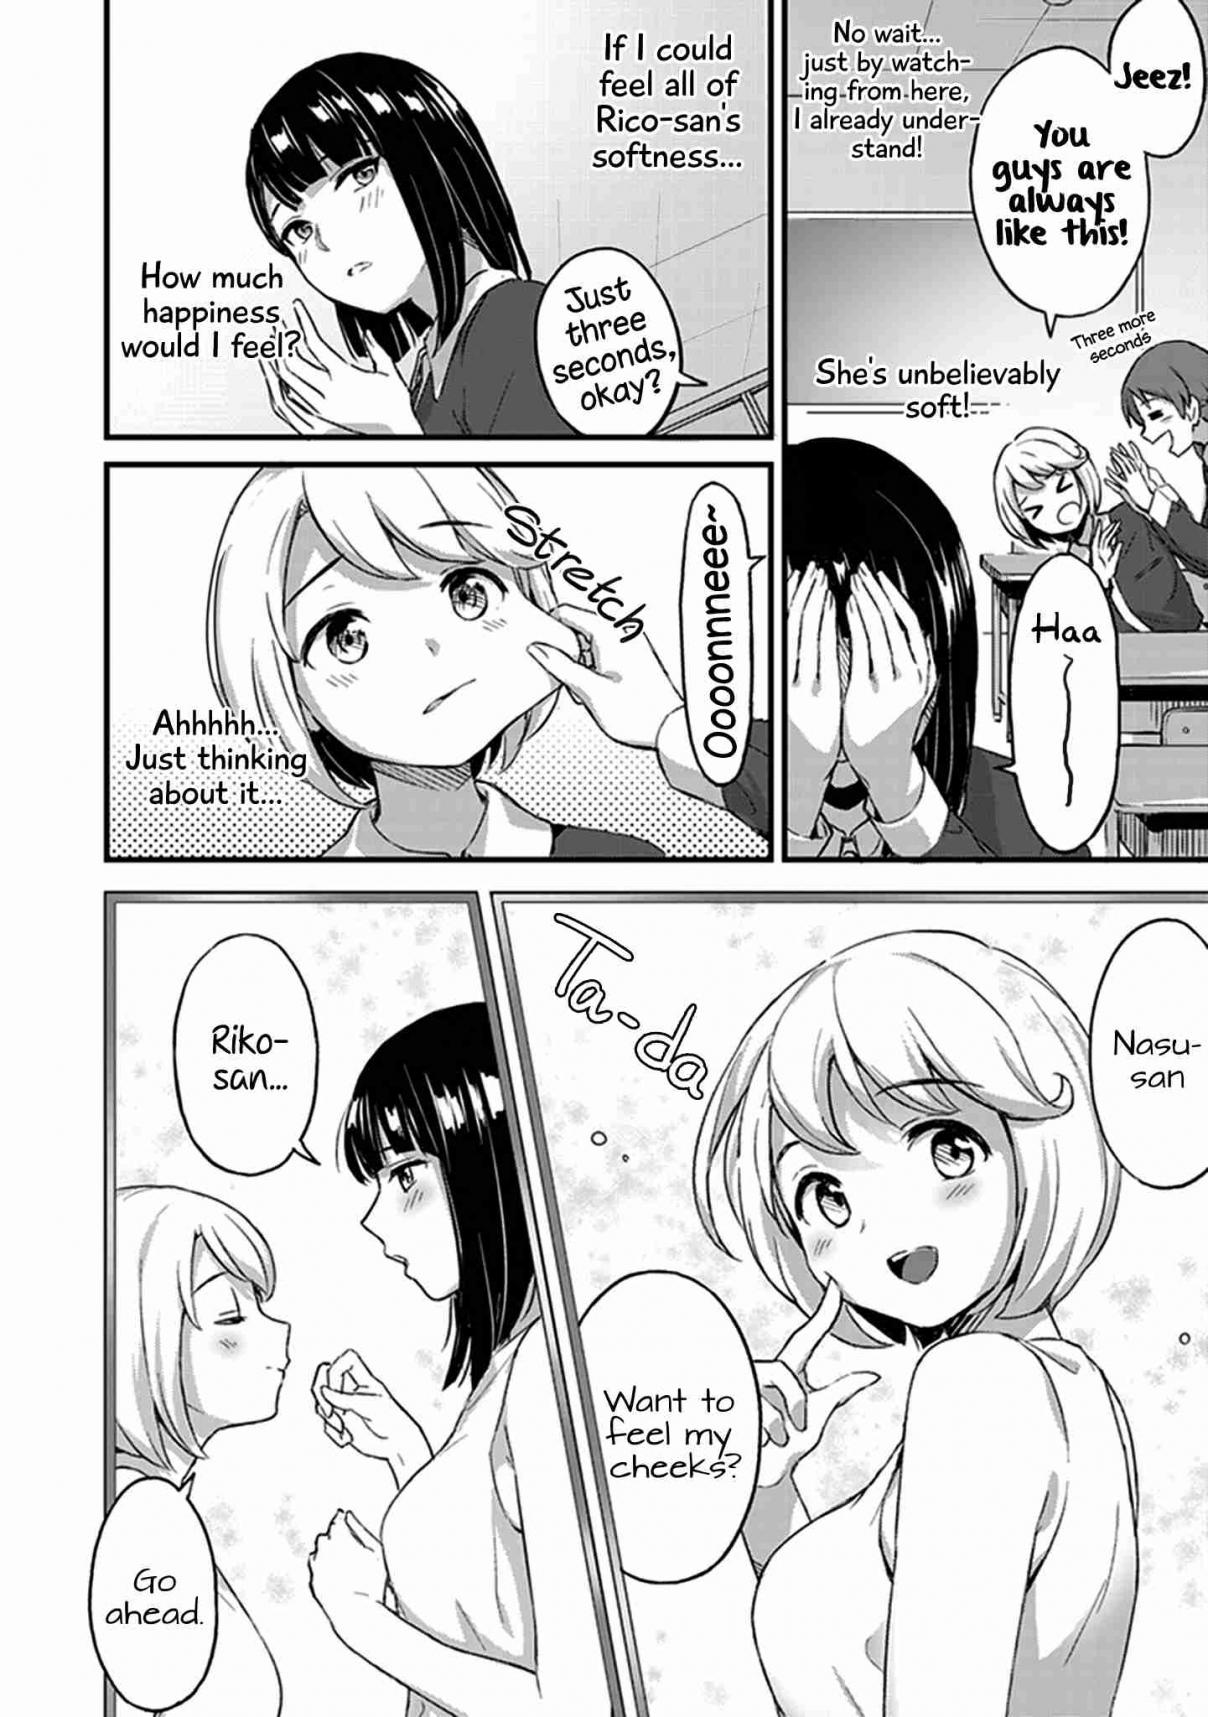 I Want to Hug a Girl Like This! Short Stories Vol. 1 Ch. 25 The Girl Who Wants To Rub Them [by Shijou Mako]